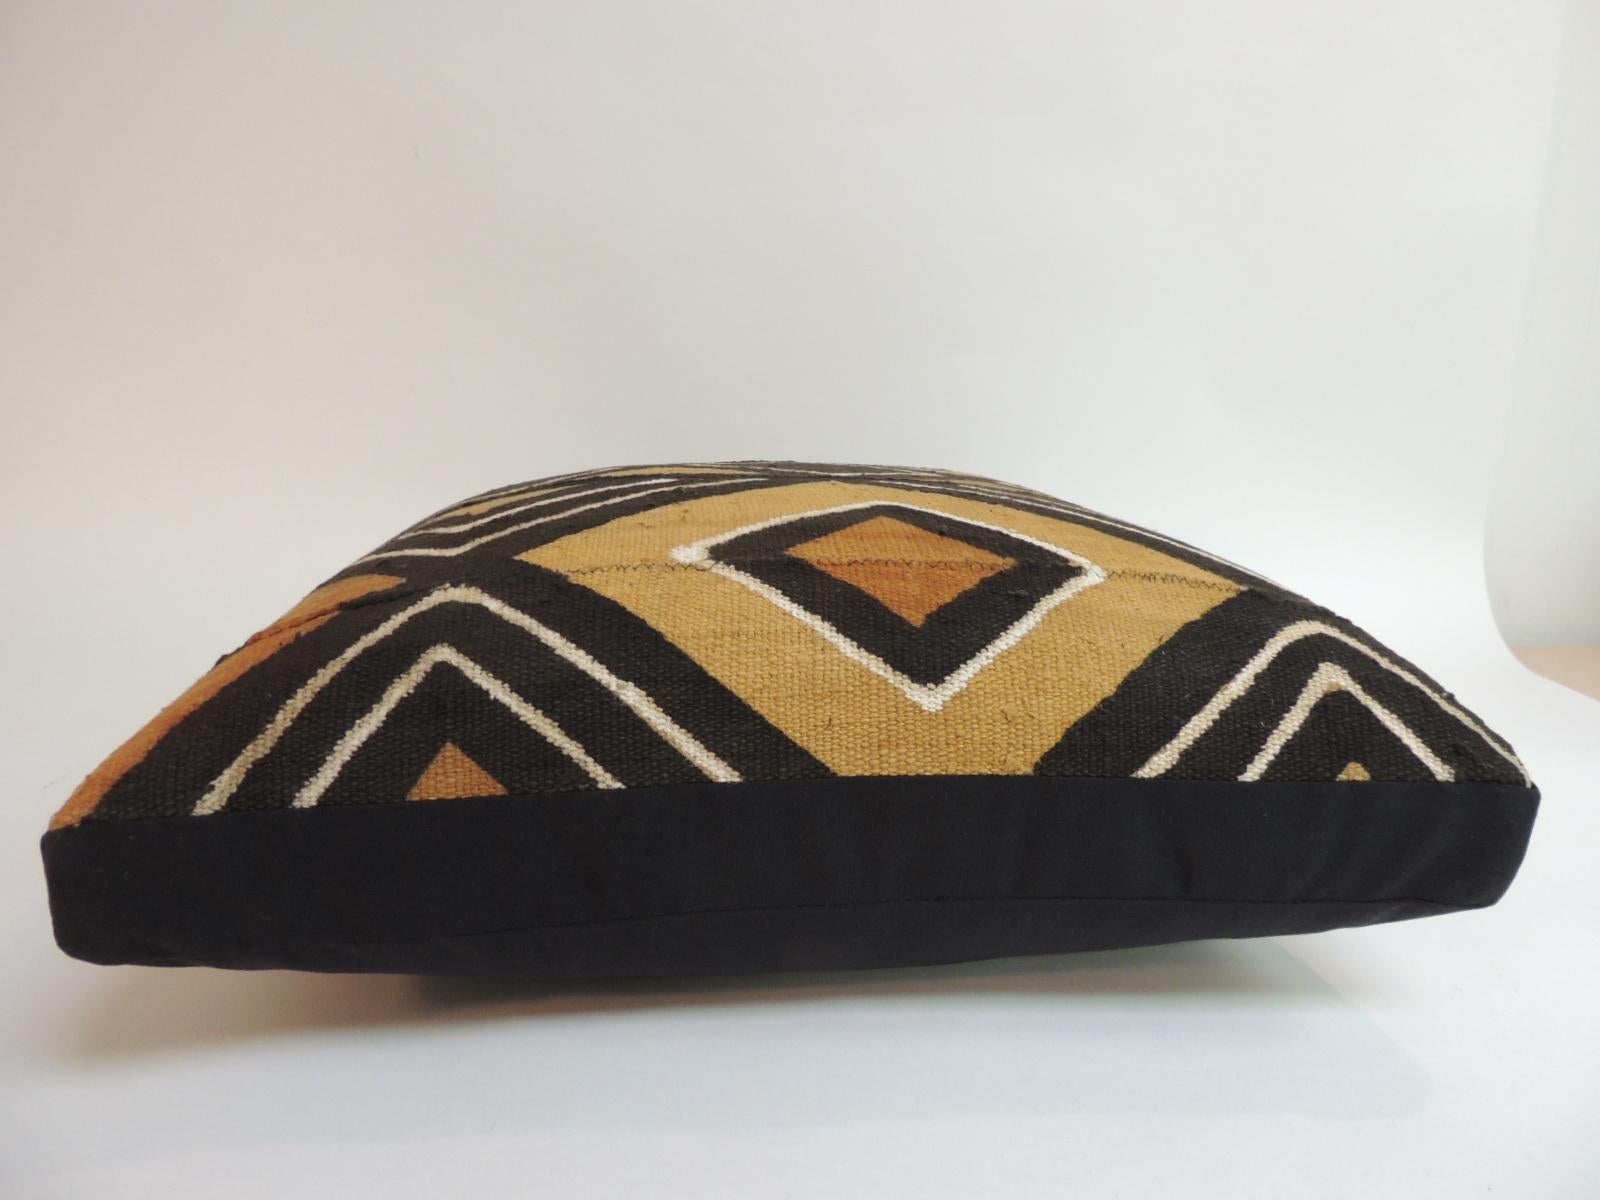 Vintage graphic African artisanal textile mudcloth decorative pillow
Square box-style decorative pillows handcrafted with an African mudcloth graphic artisanal textile. Throw pillow finished with a handstitched closure. Custom made pillow insert.